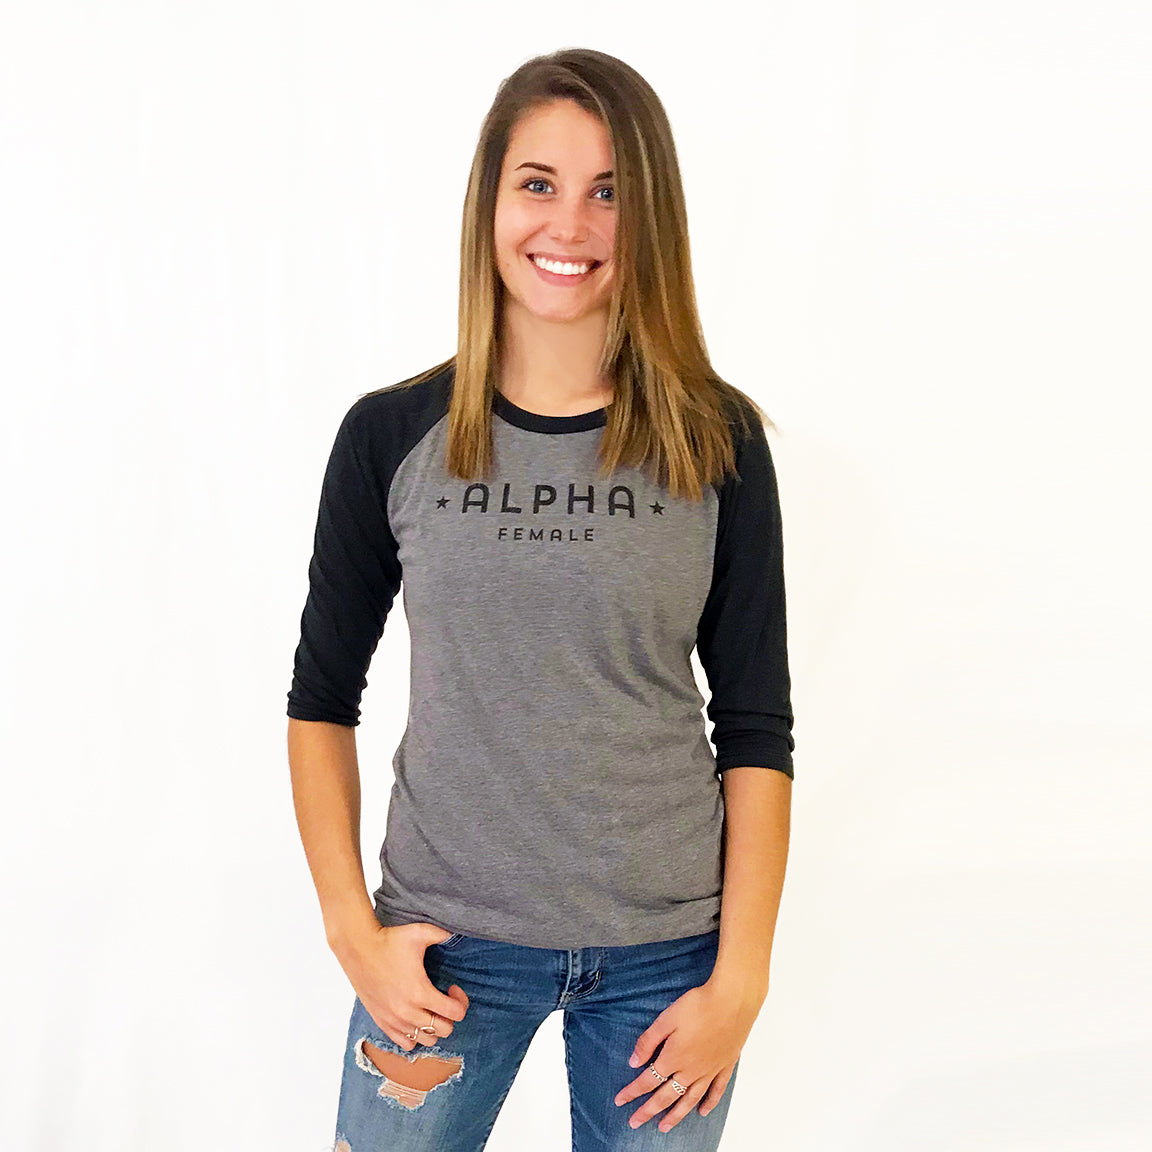 One Plane Jane Alpha Female Baseball Tee shown in grey/ black with black letters . Super soft tri-blend.. Inspired by pilots, aviators but perfect for all strong independent women.